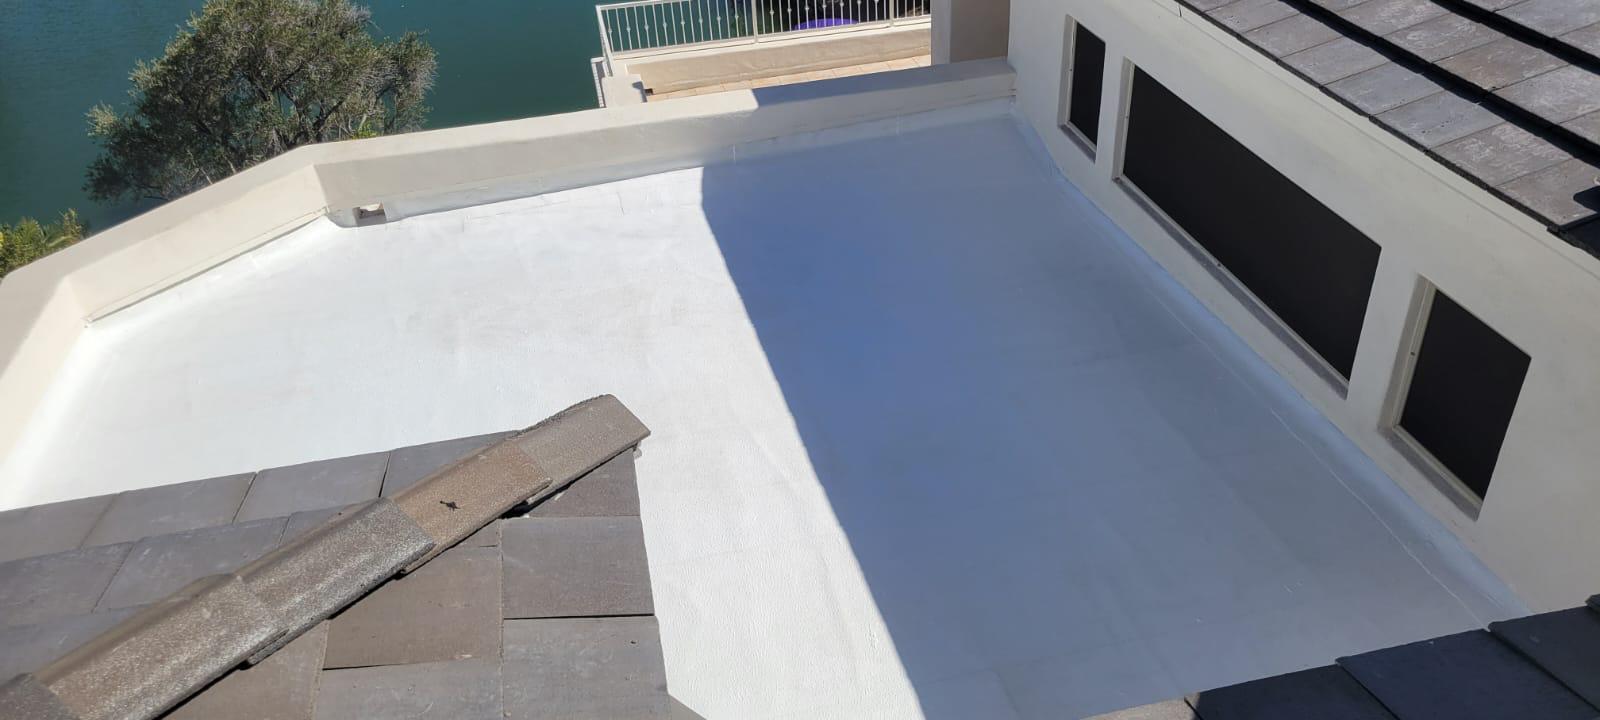 Estancia residence featuring a seamless and efficient spray foam roof installation.